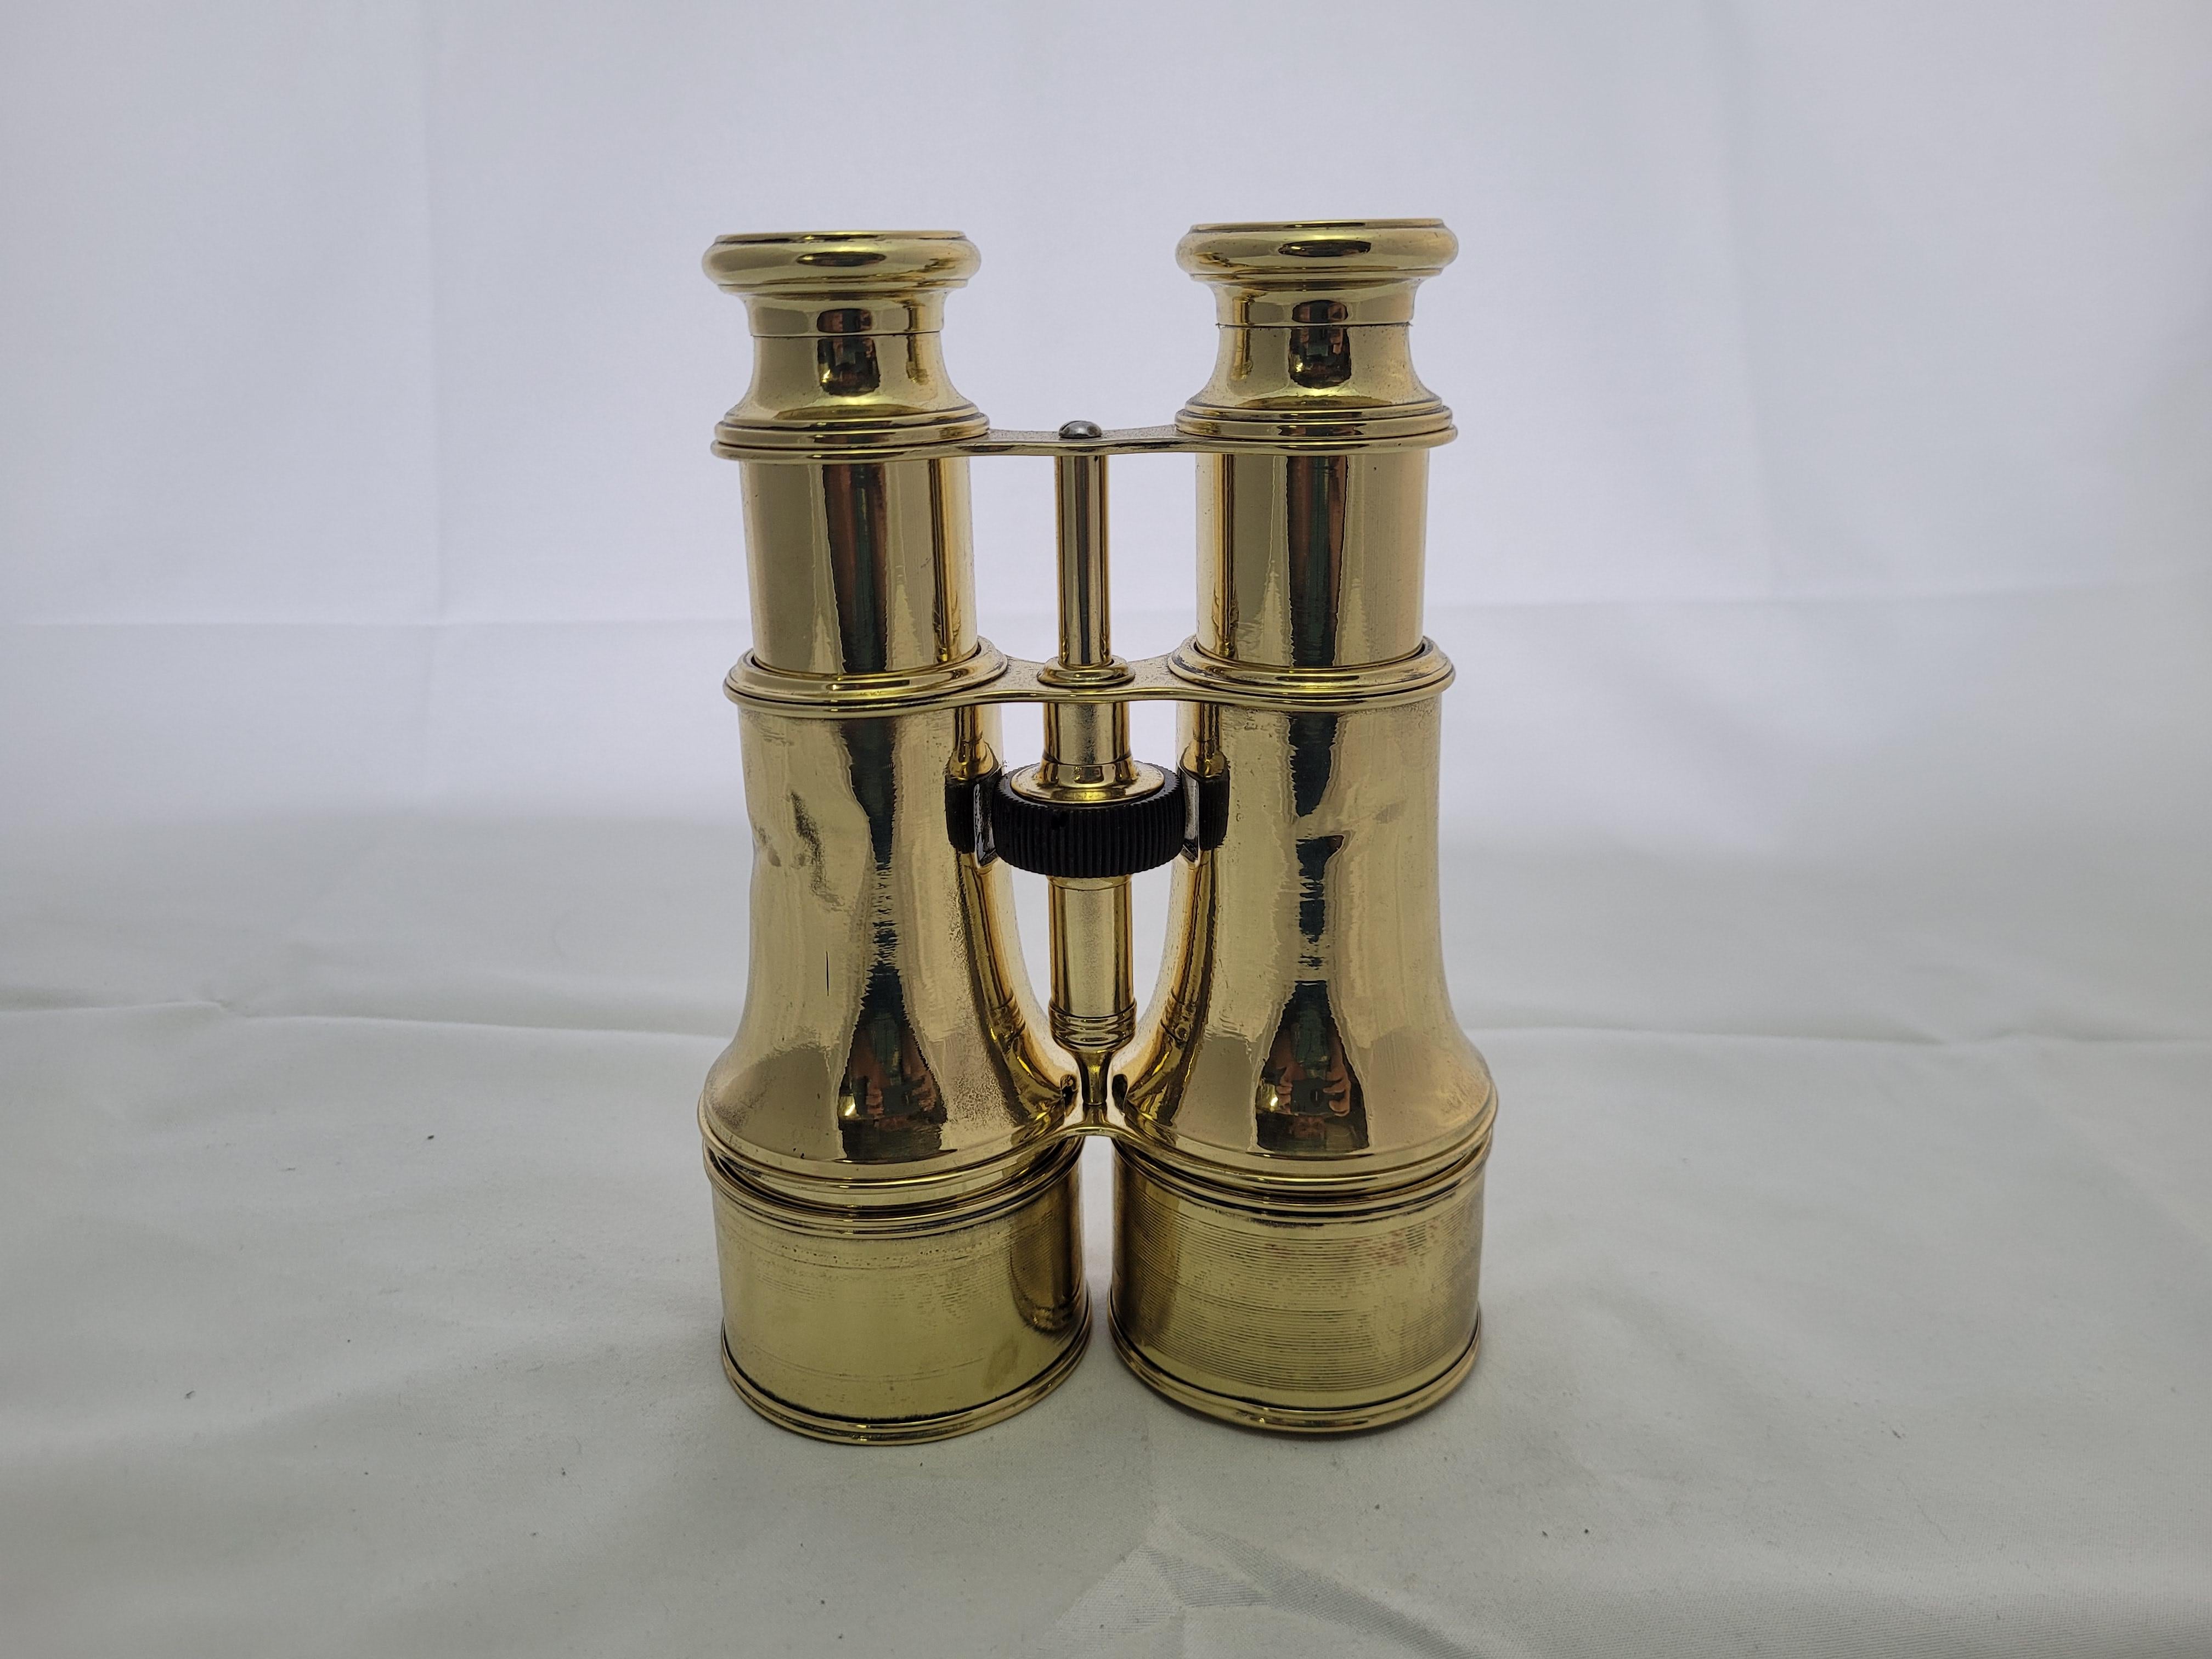 European French Yachting Binoculars by Lemaire Fabt, Paris TEL004